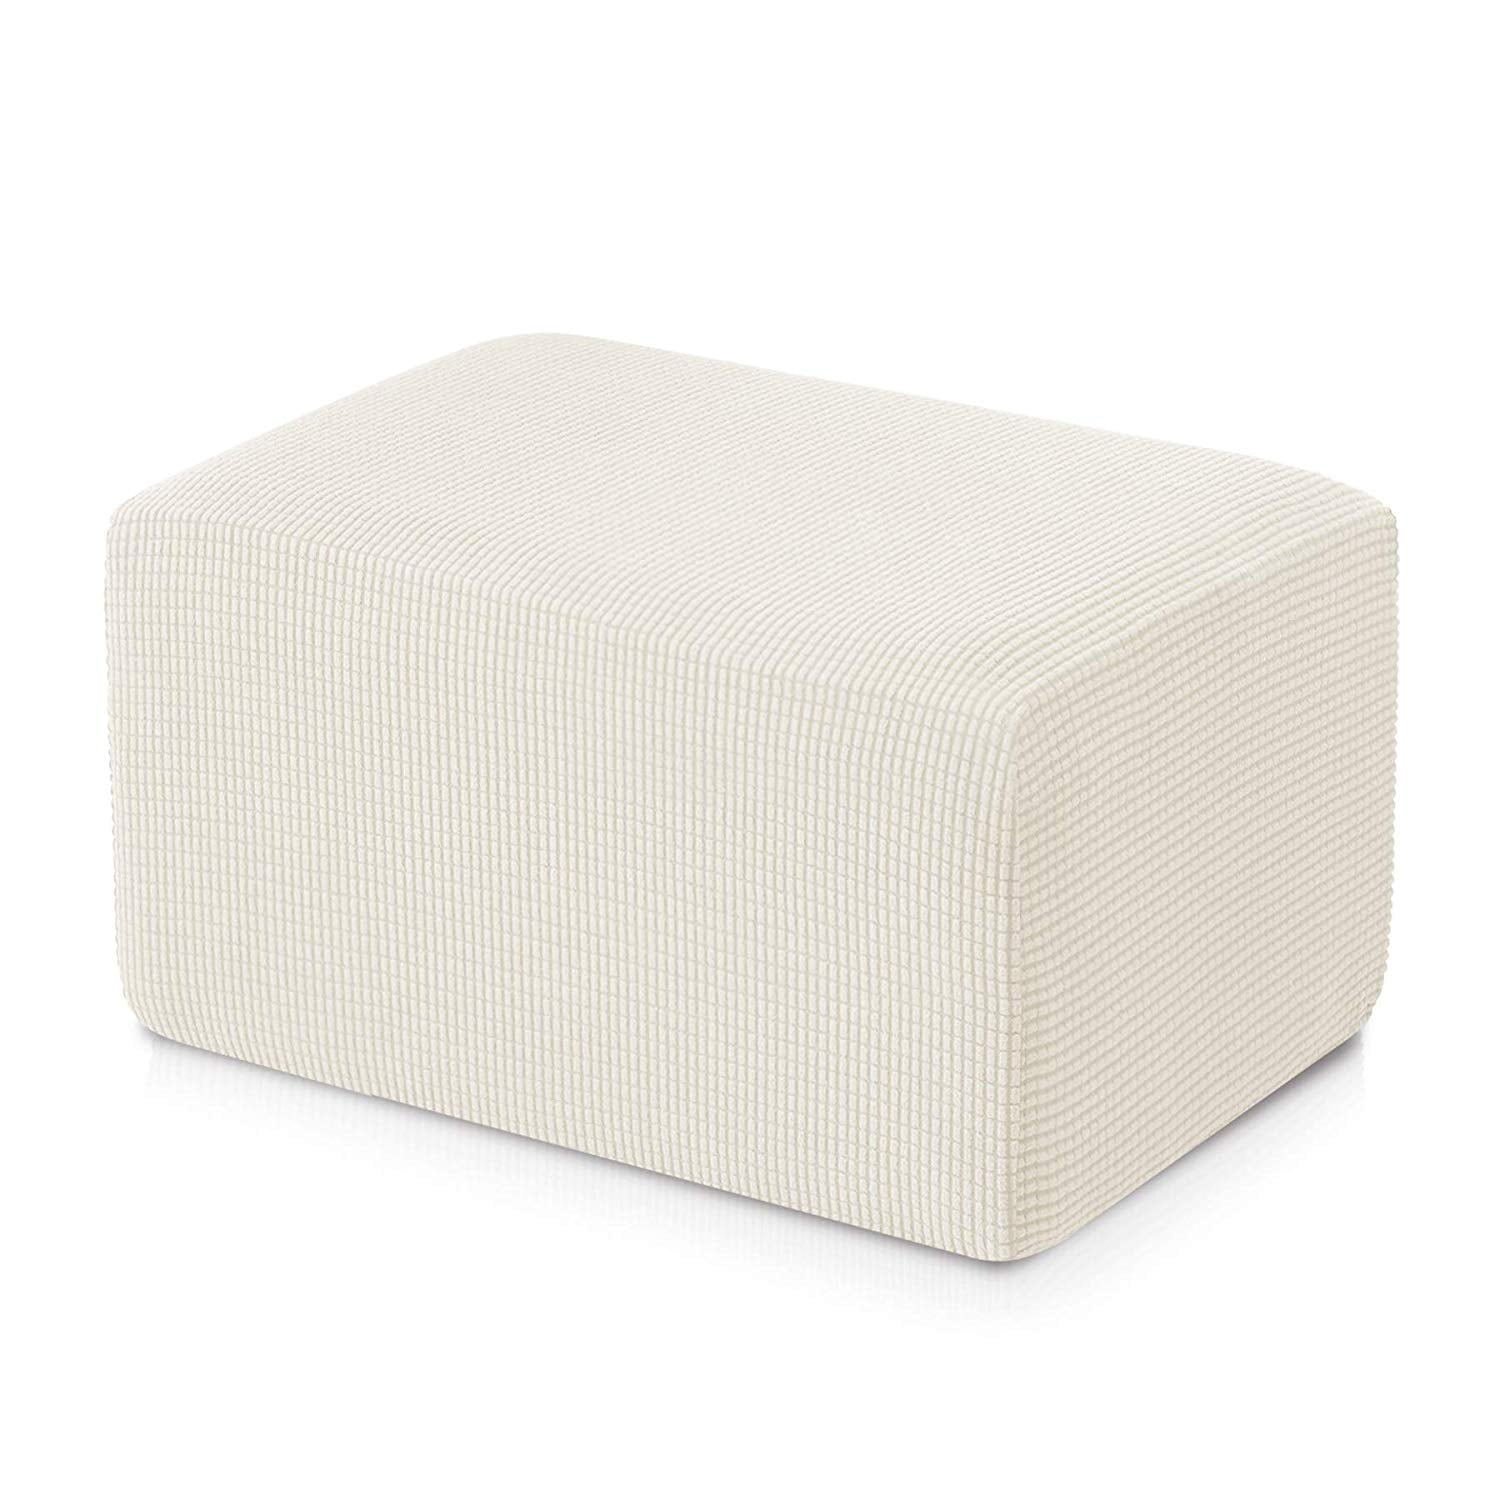 subrtex Stretch Storage Ottoman Slipcover Protector Oversize Spandex Elastic Rectangle Footstool Sofa Slip Cover for Foot Rest Stool Furniture in Living Room XL, Off-White